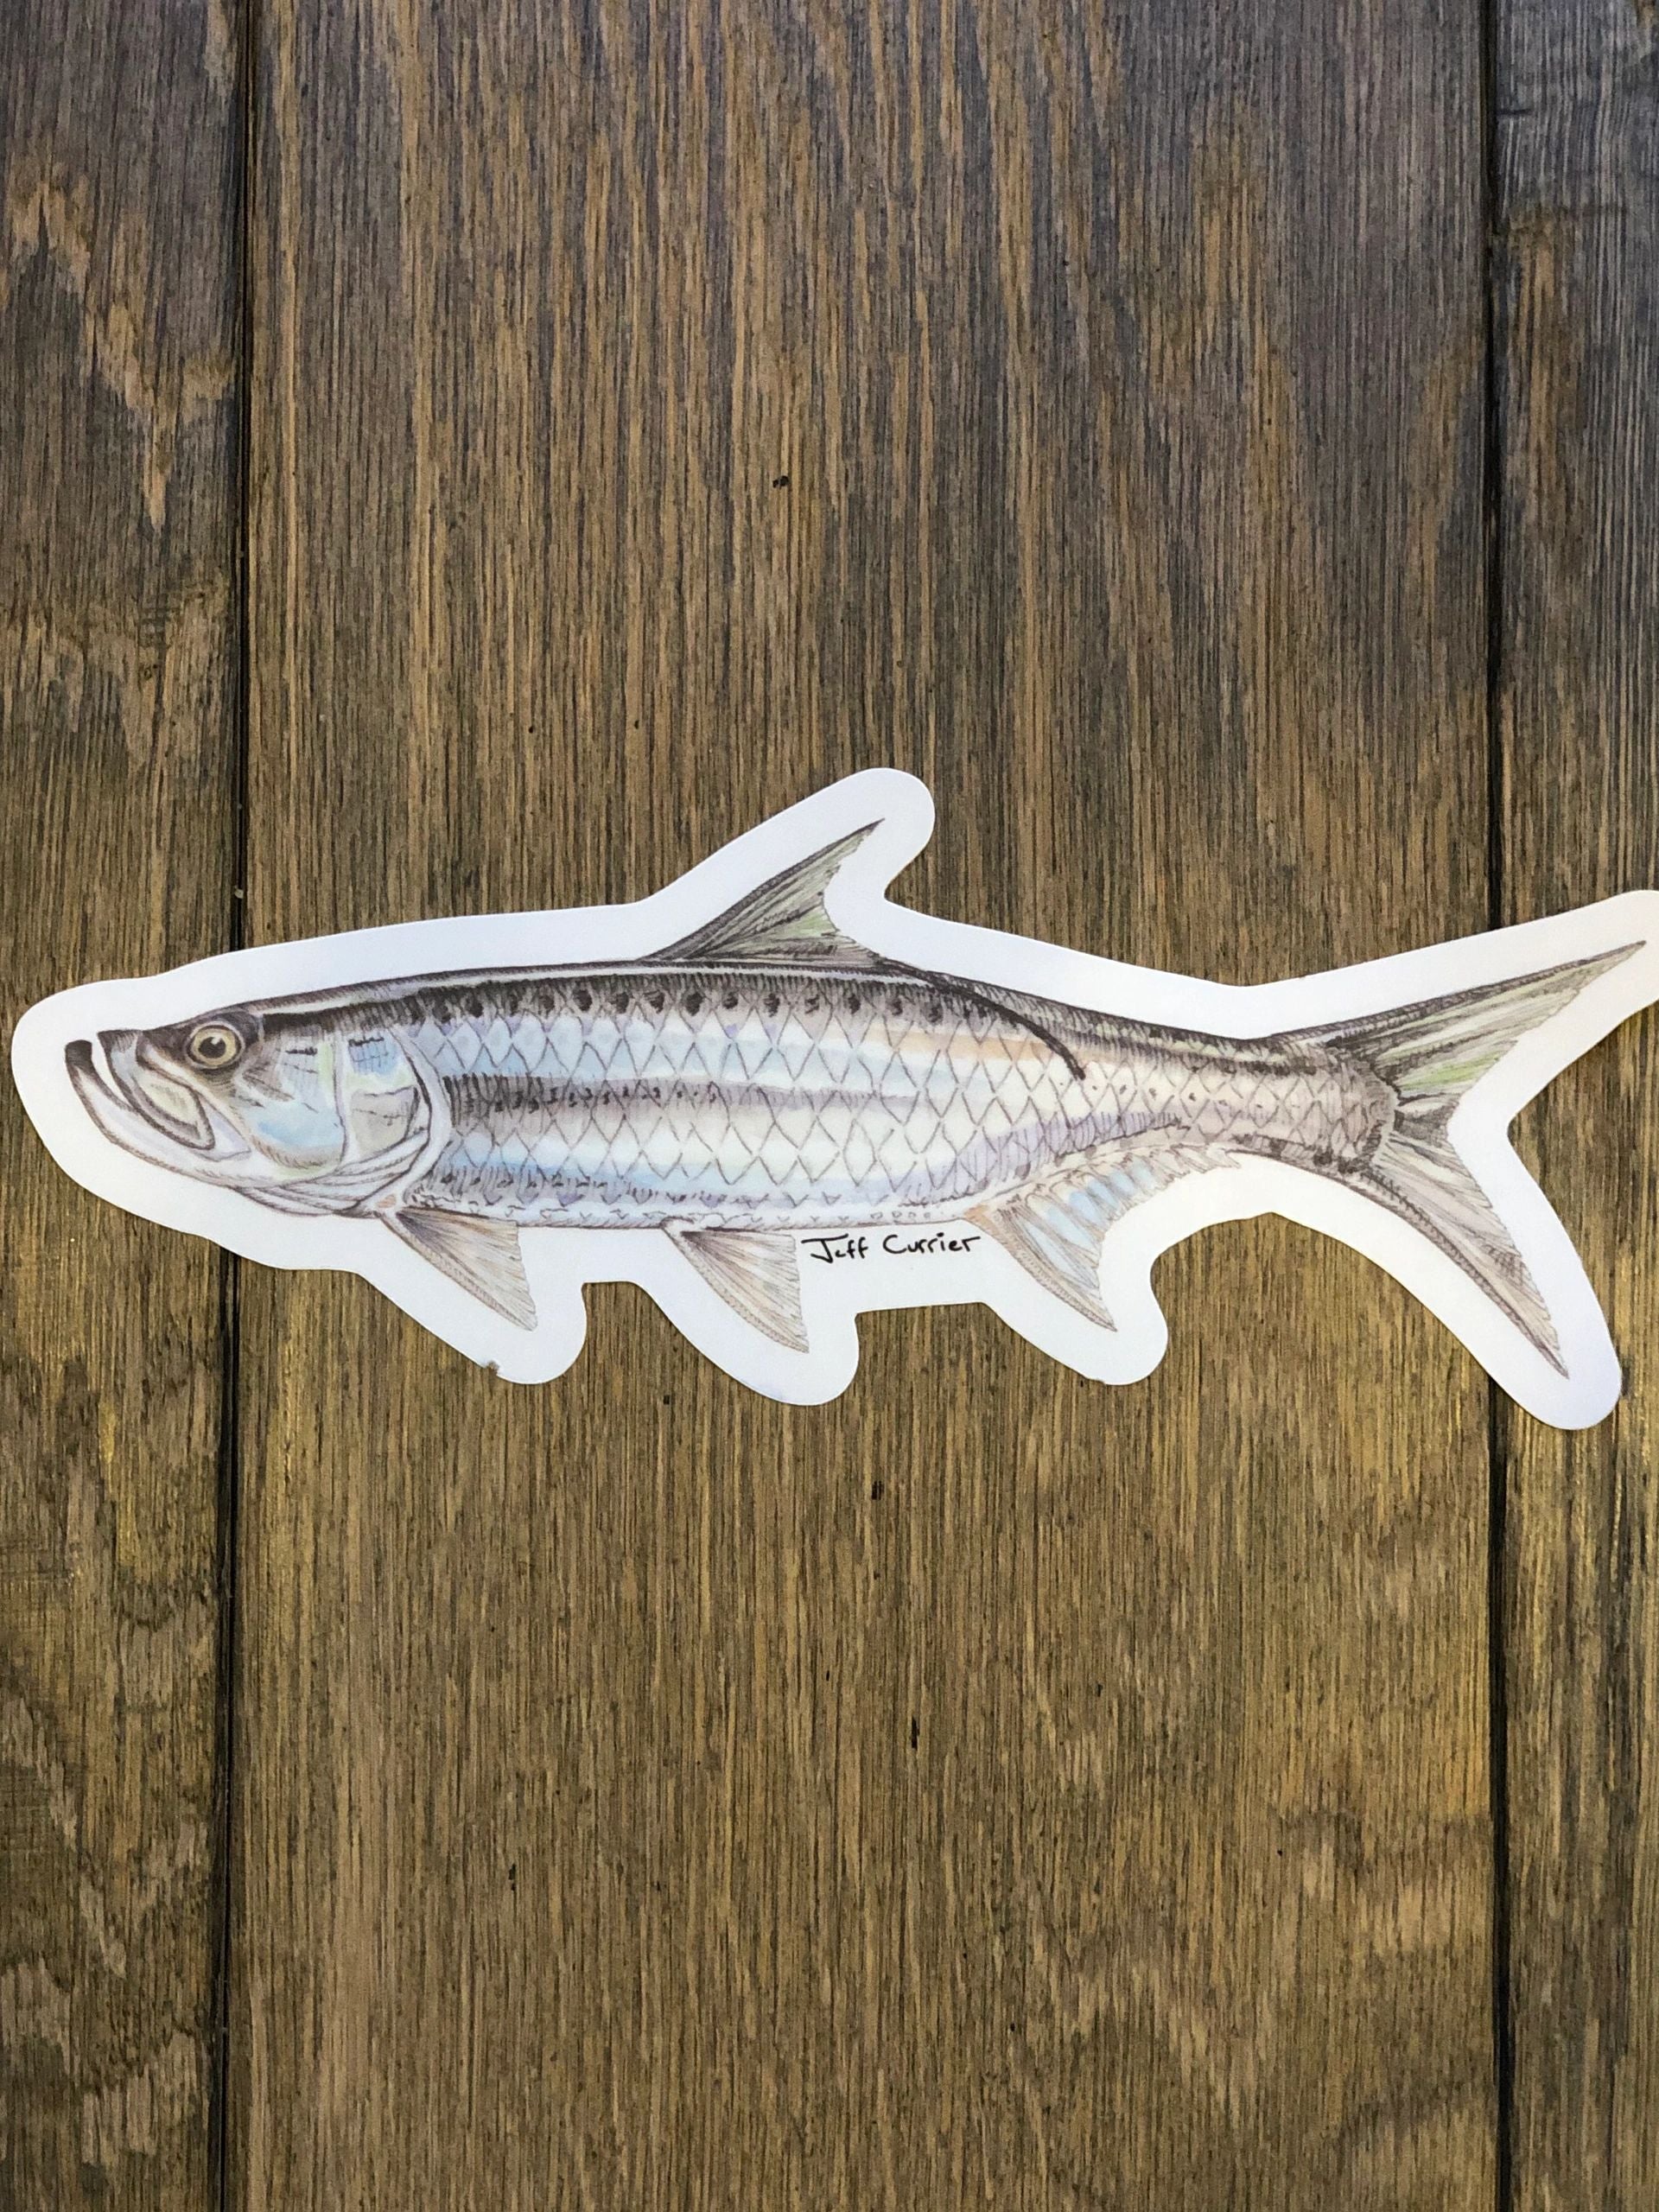 Fishing Hook Vinyl Decal 6 inches tall